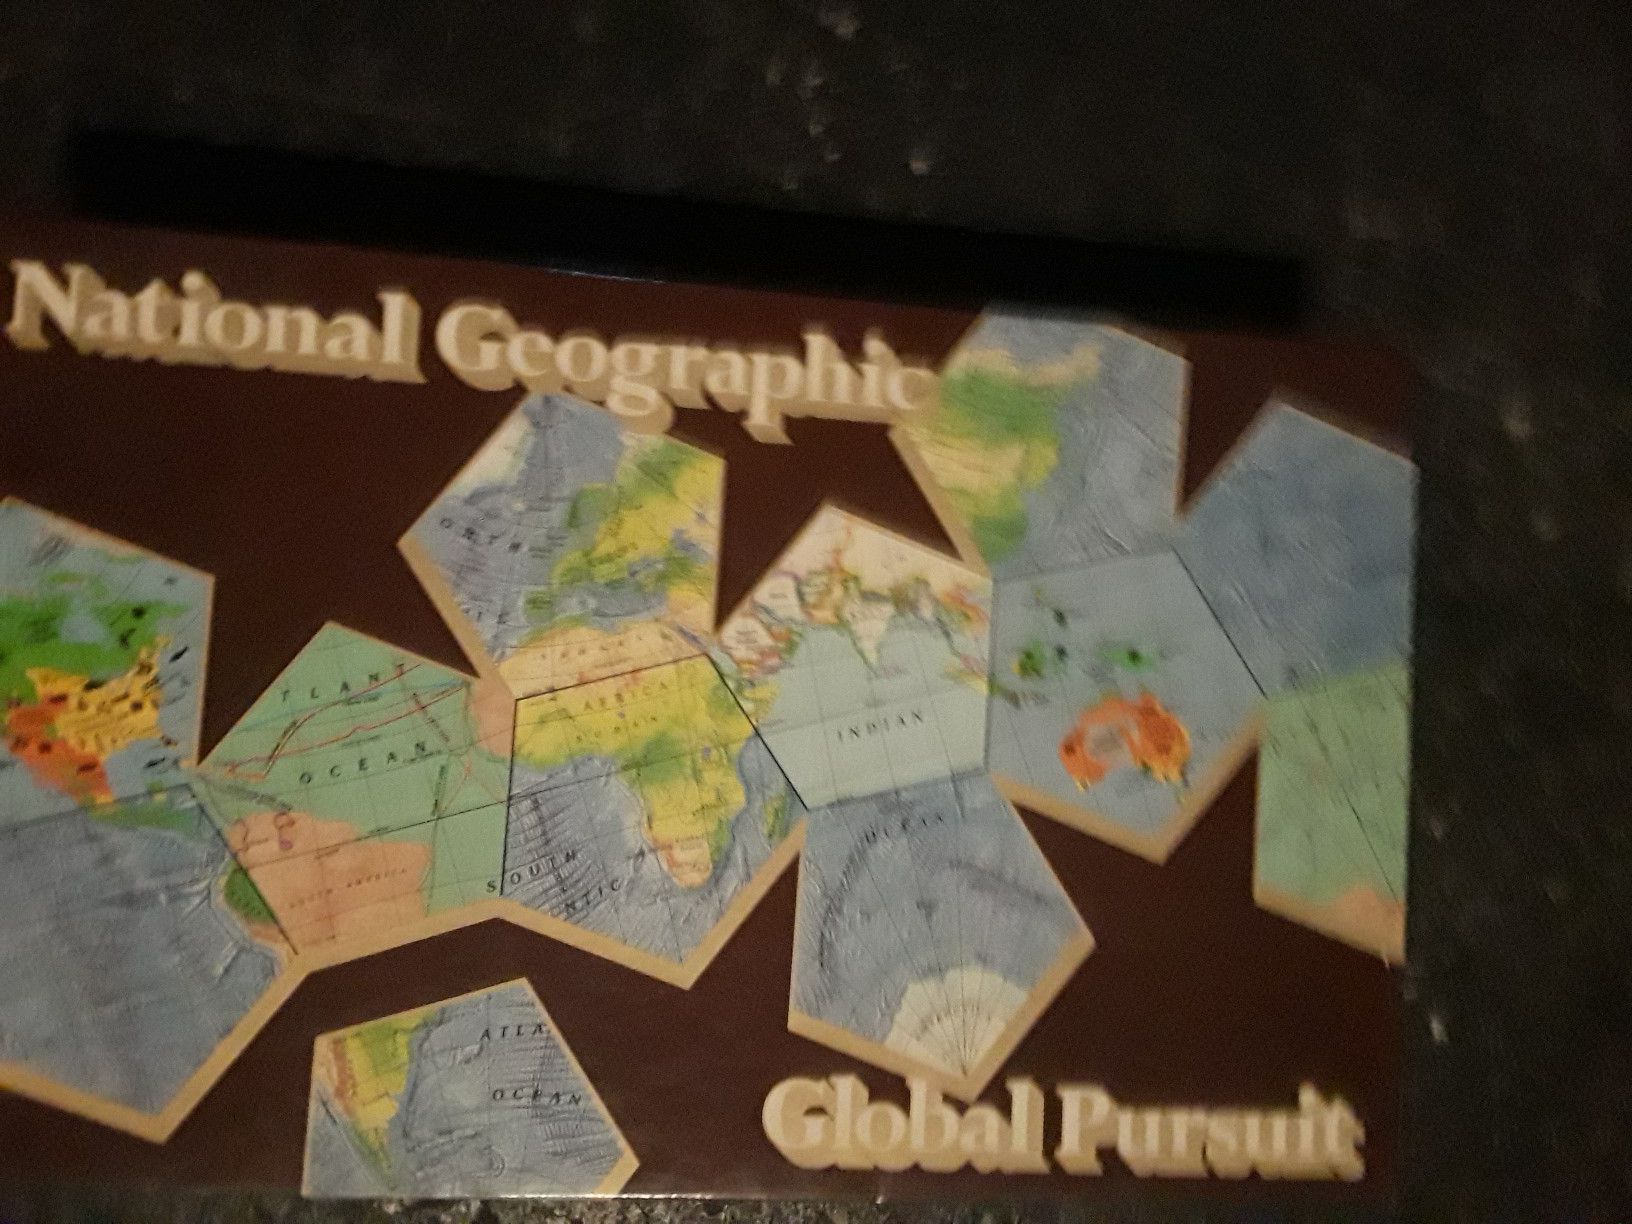 National Geographic board game